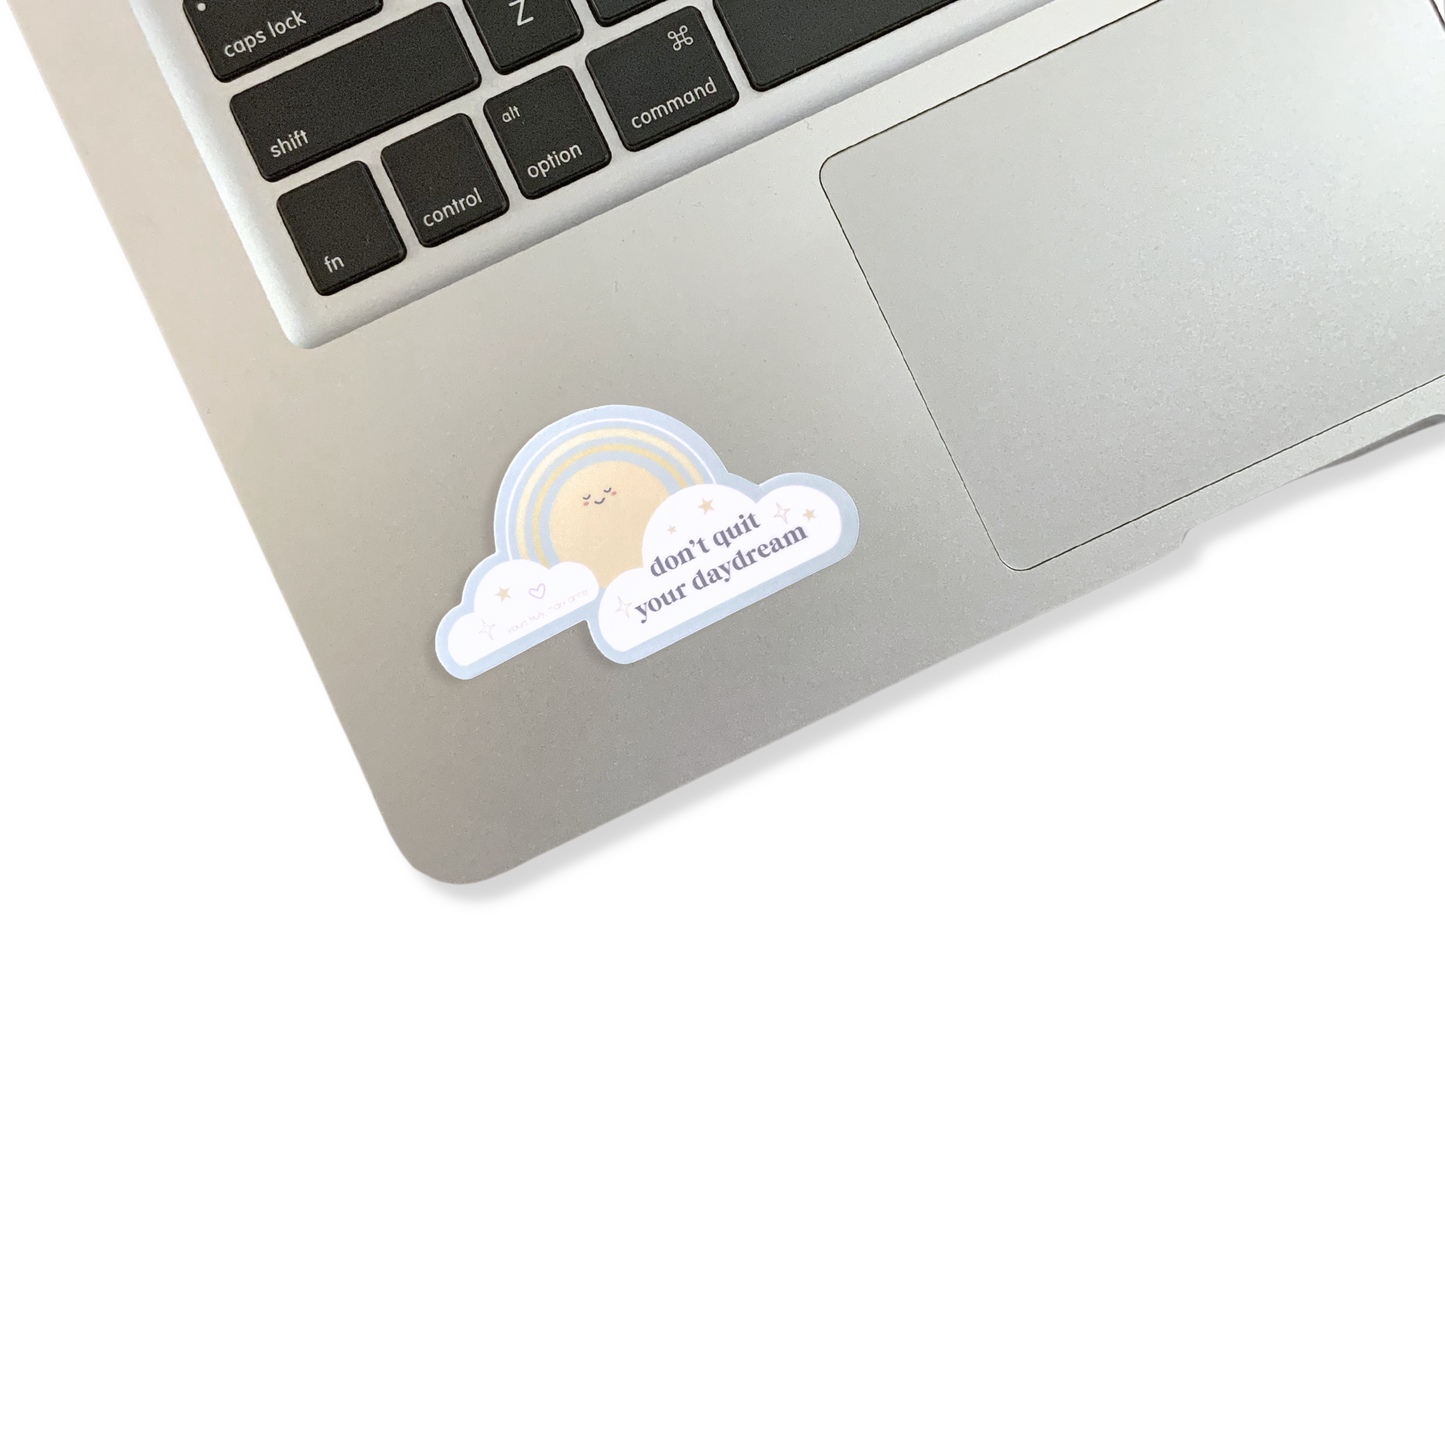 Don't Quit Your Daydream Sticker